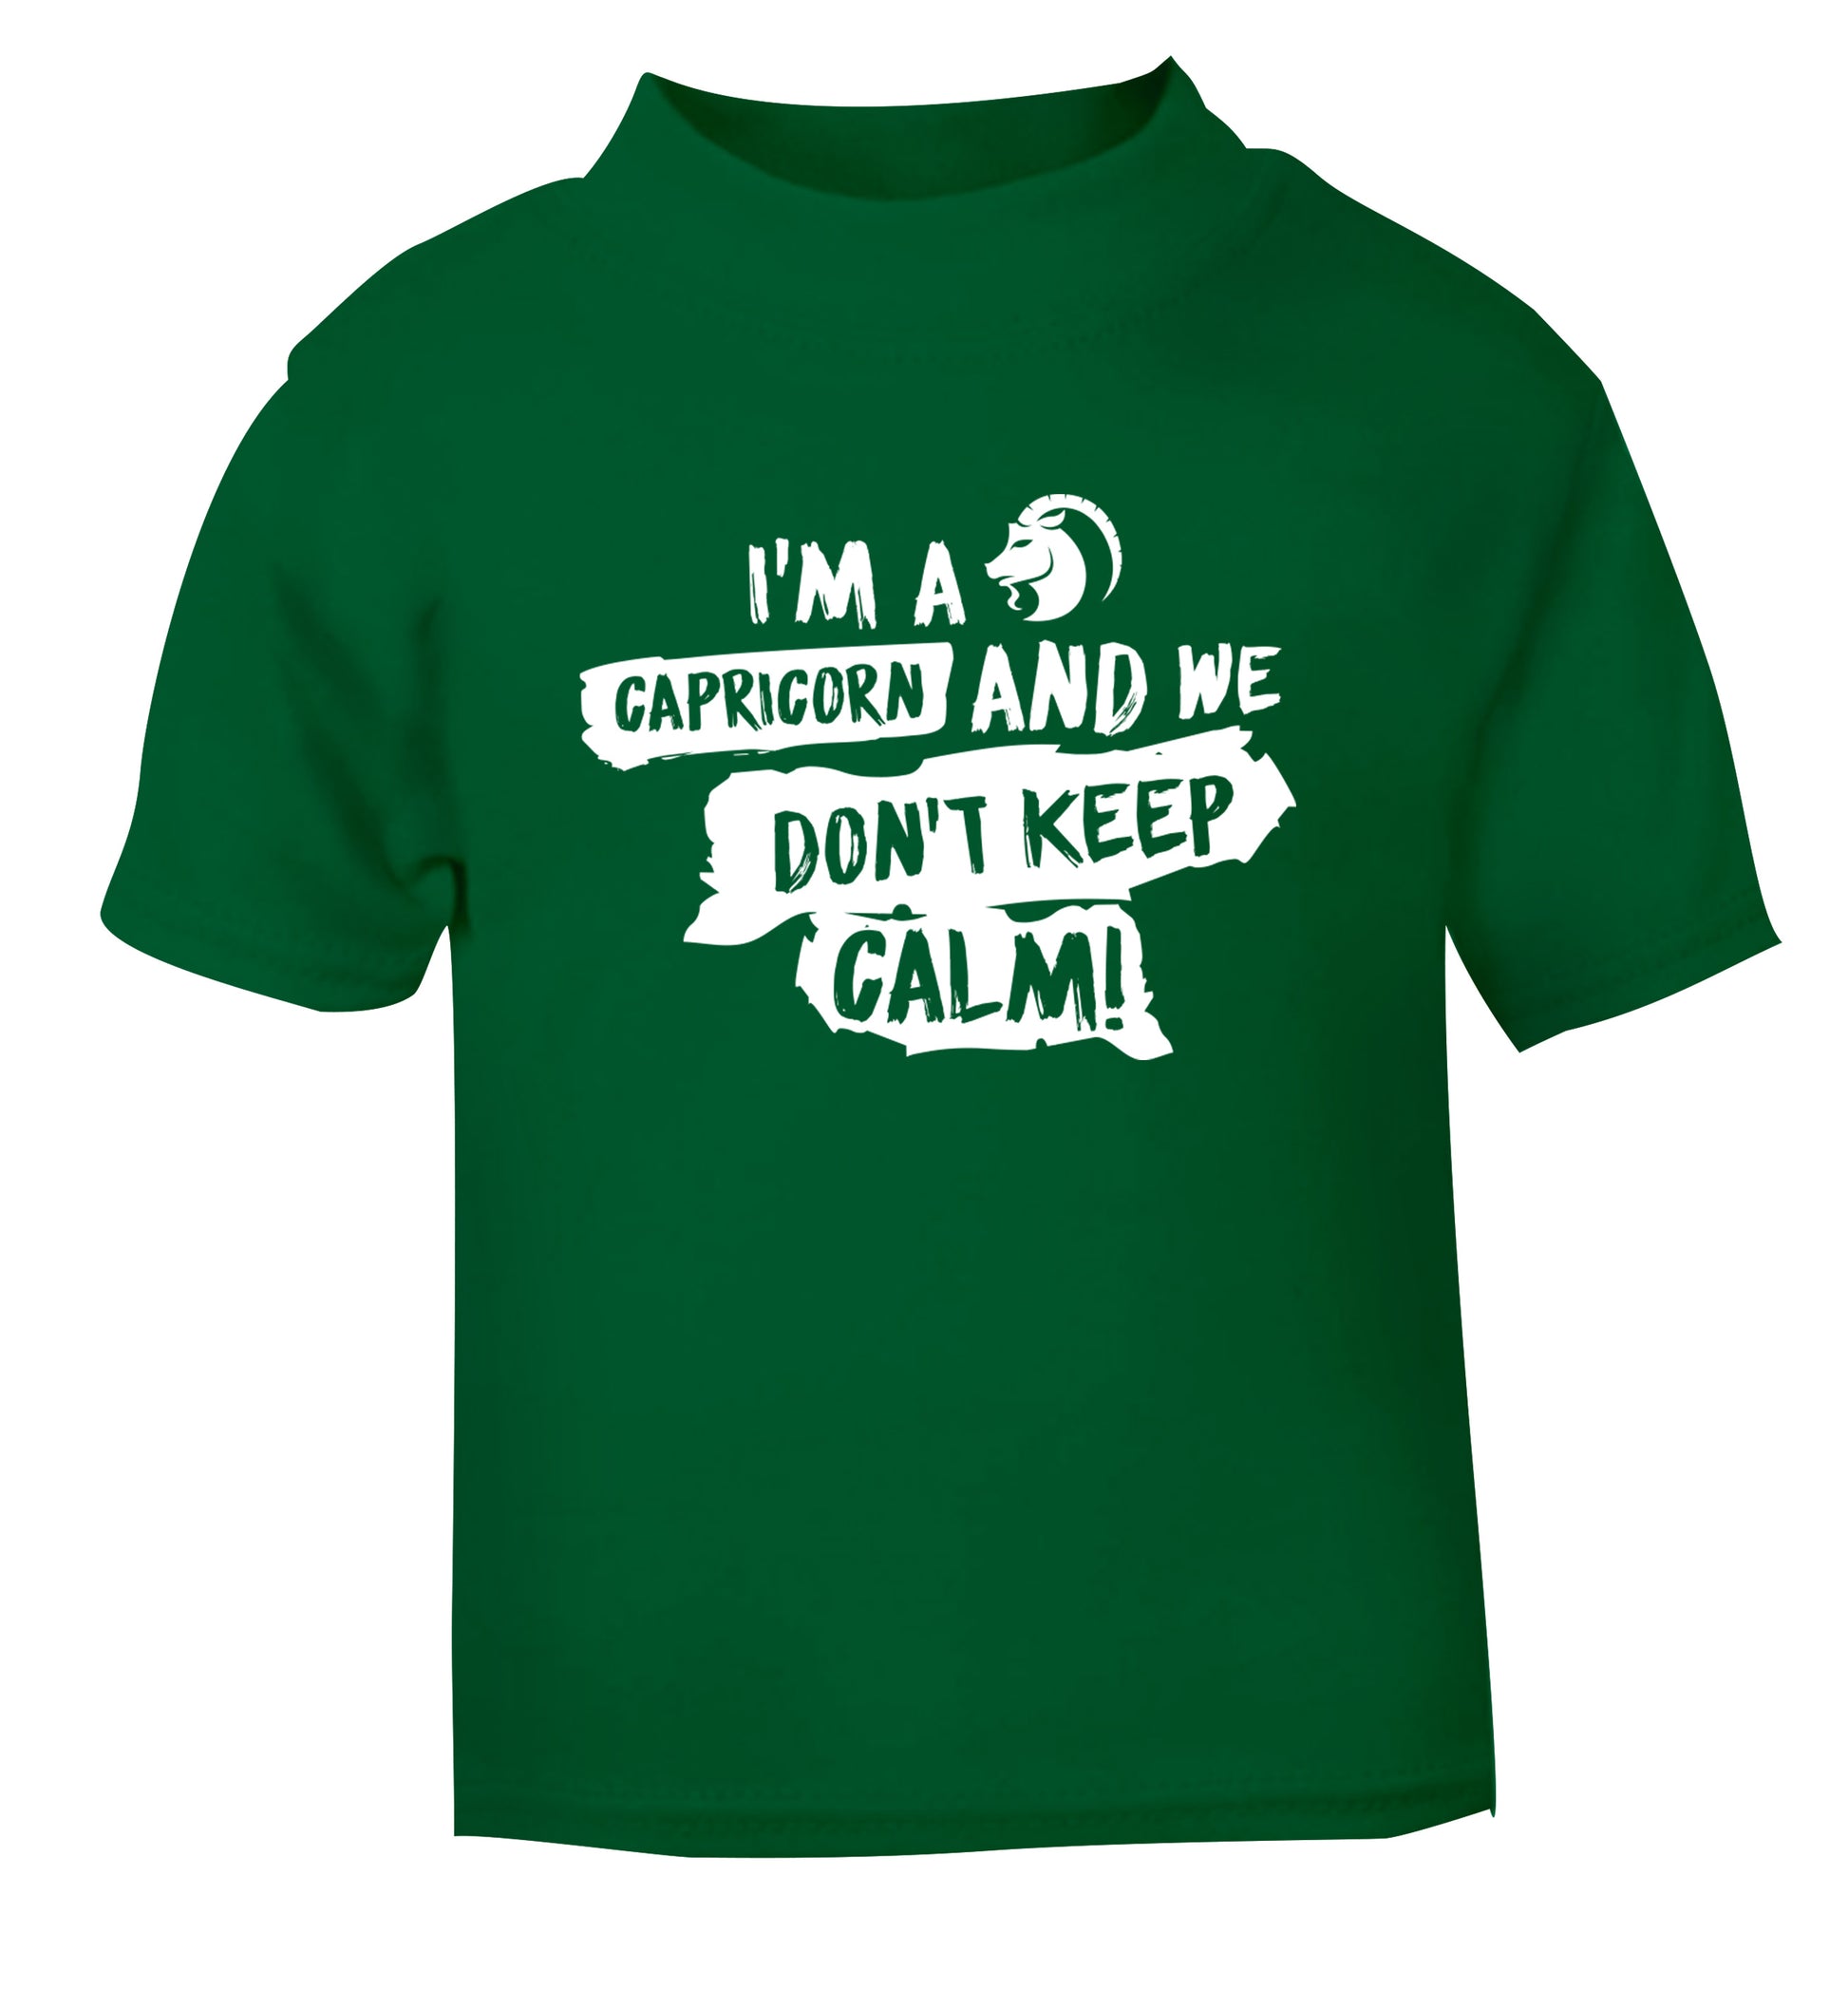 I'm a capricorn and we don't keep calm green Baby Toddler Tshirt 2 Years